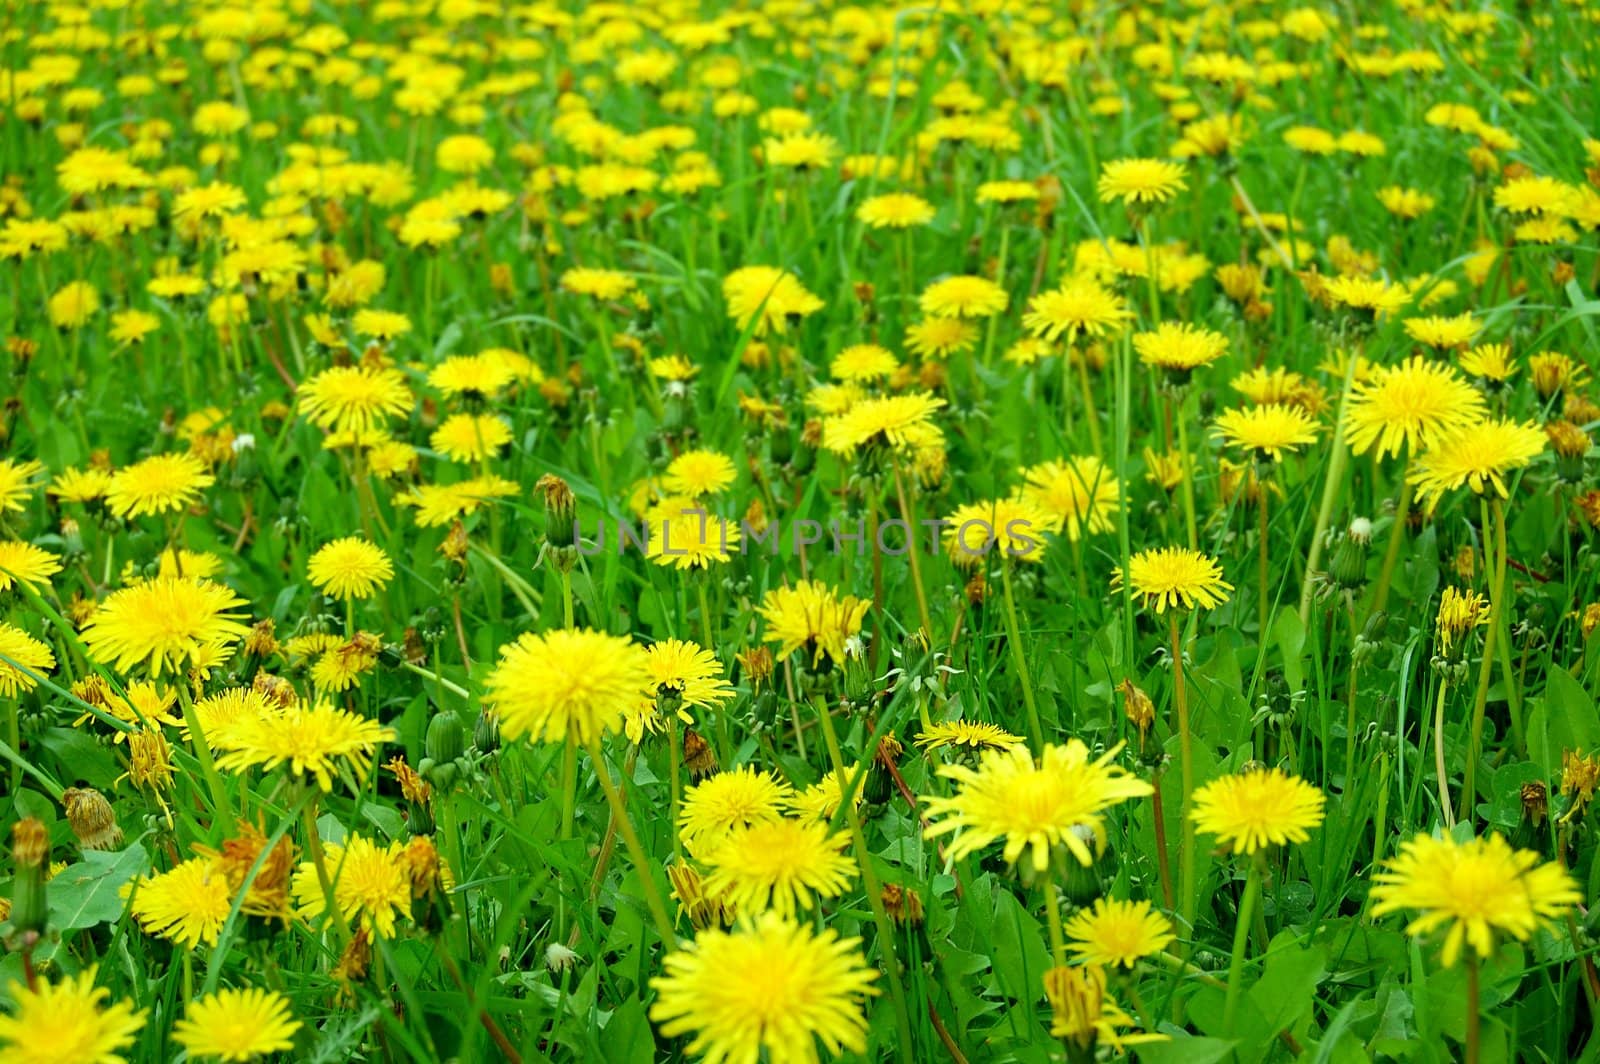 Meadow with yellow dandelions